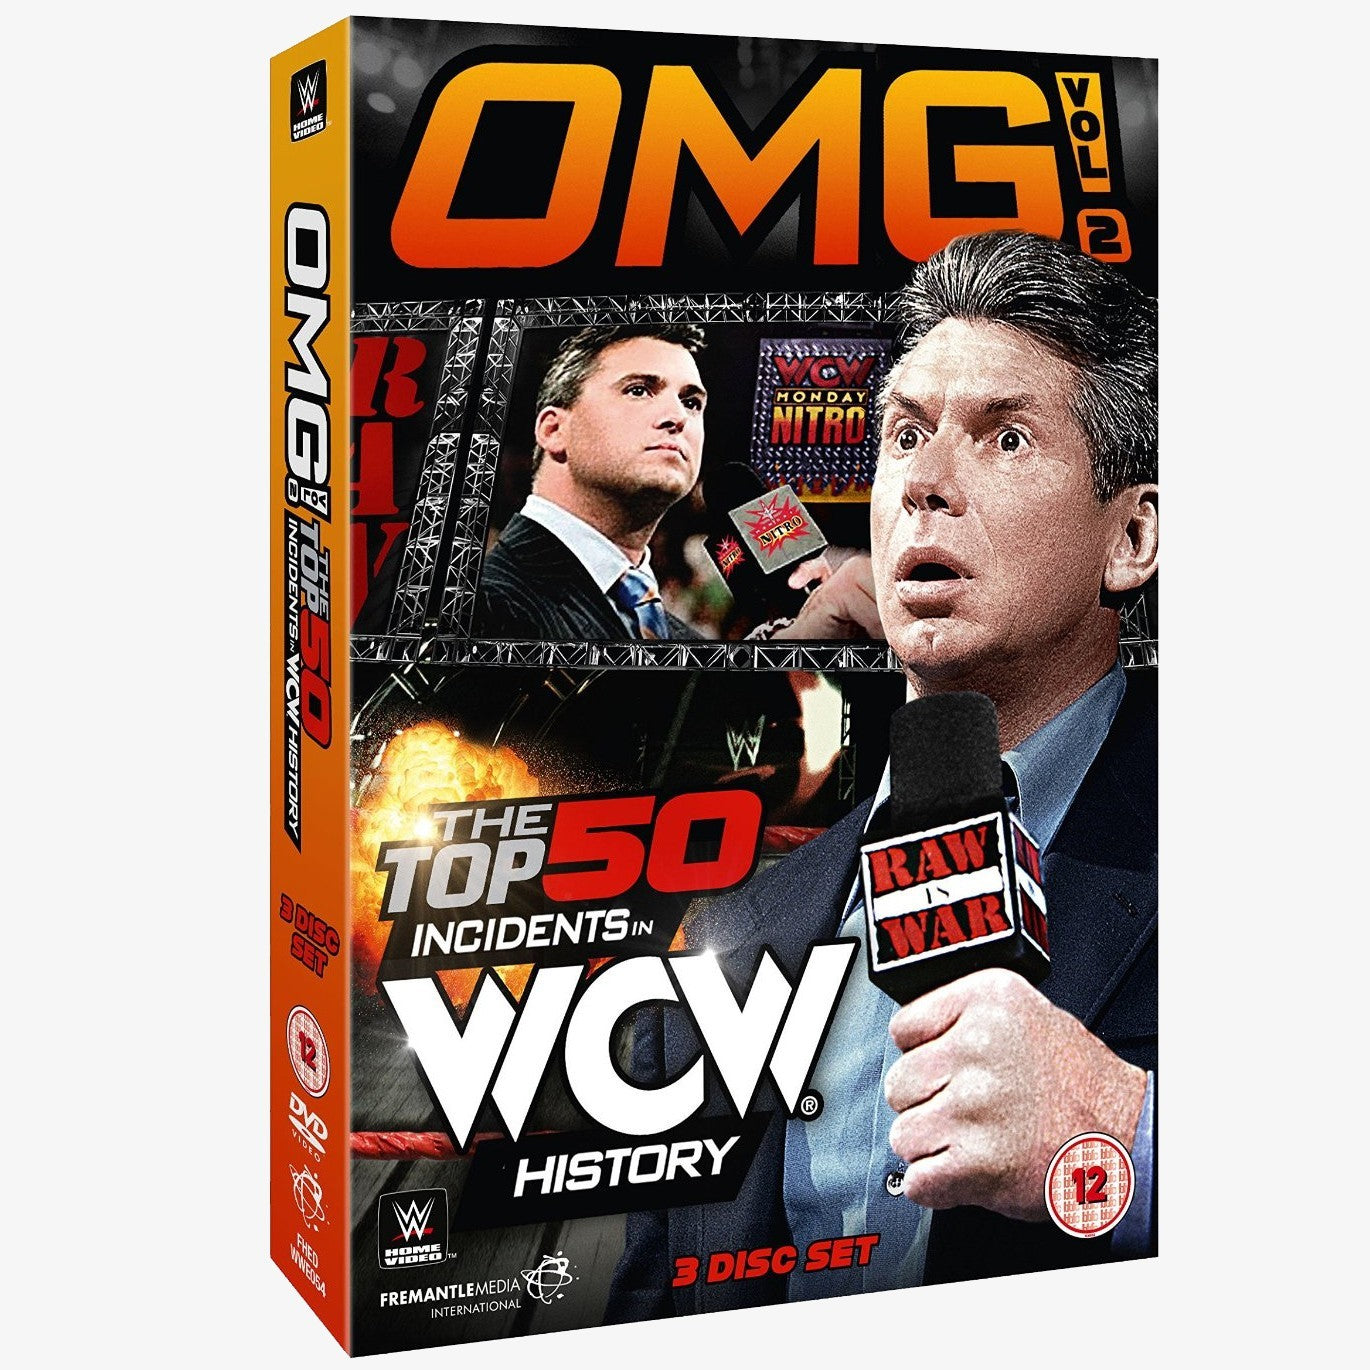 WWE OMG! Volume 2 - The Top 50 Incidents in WCW History DVD